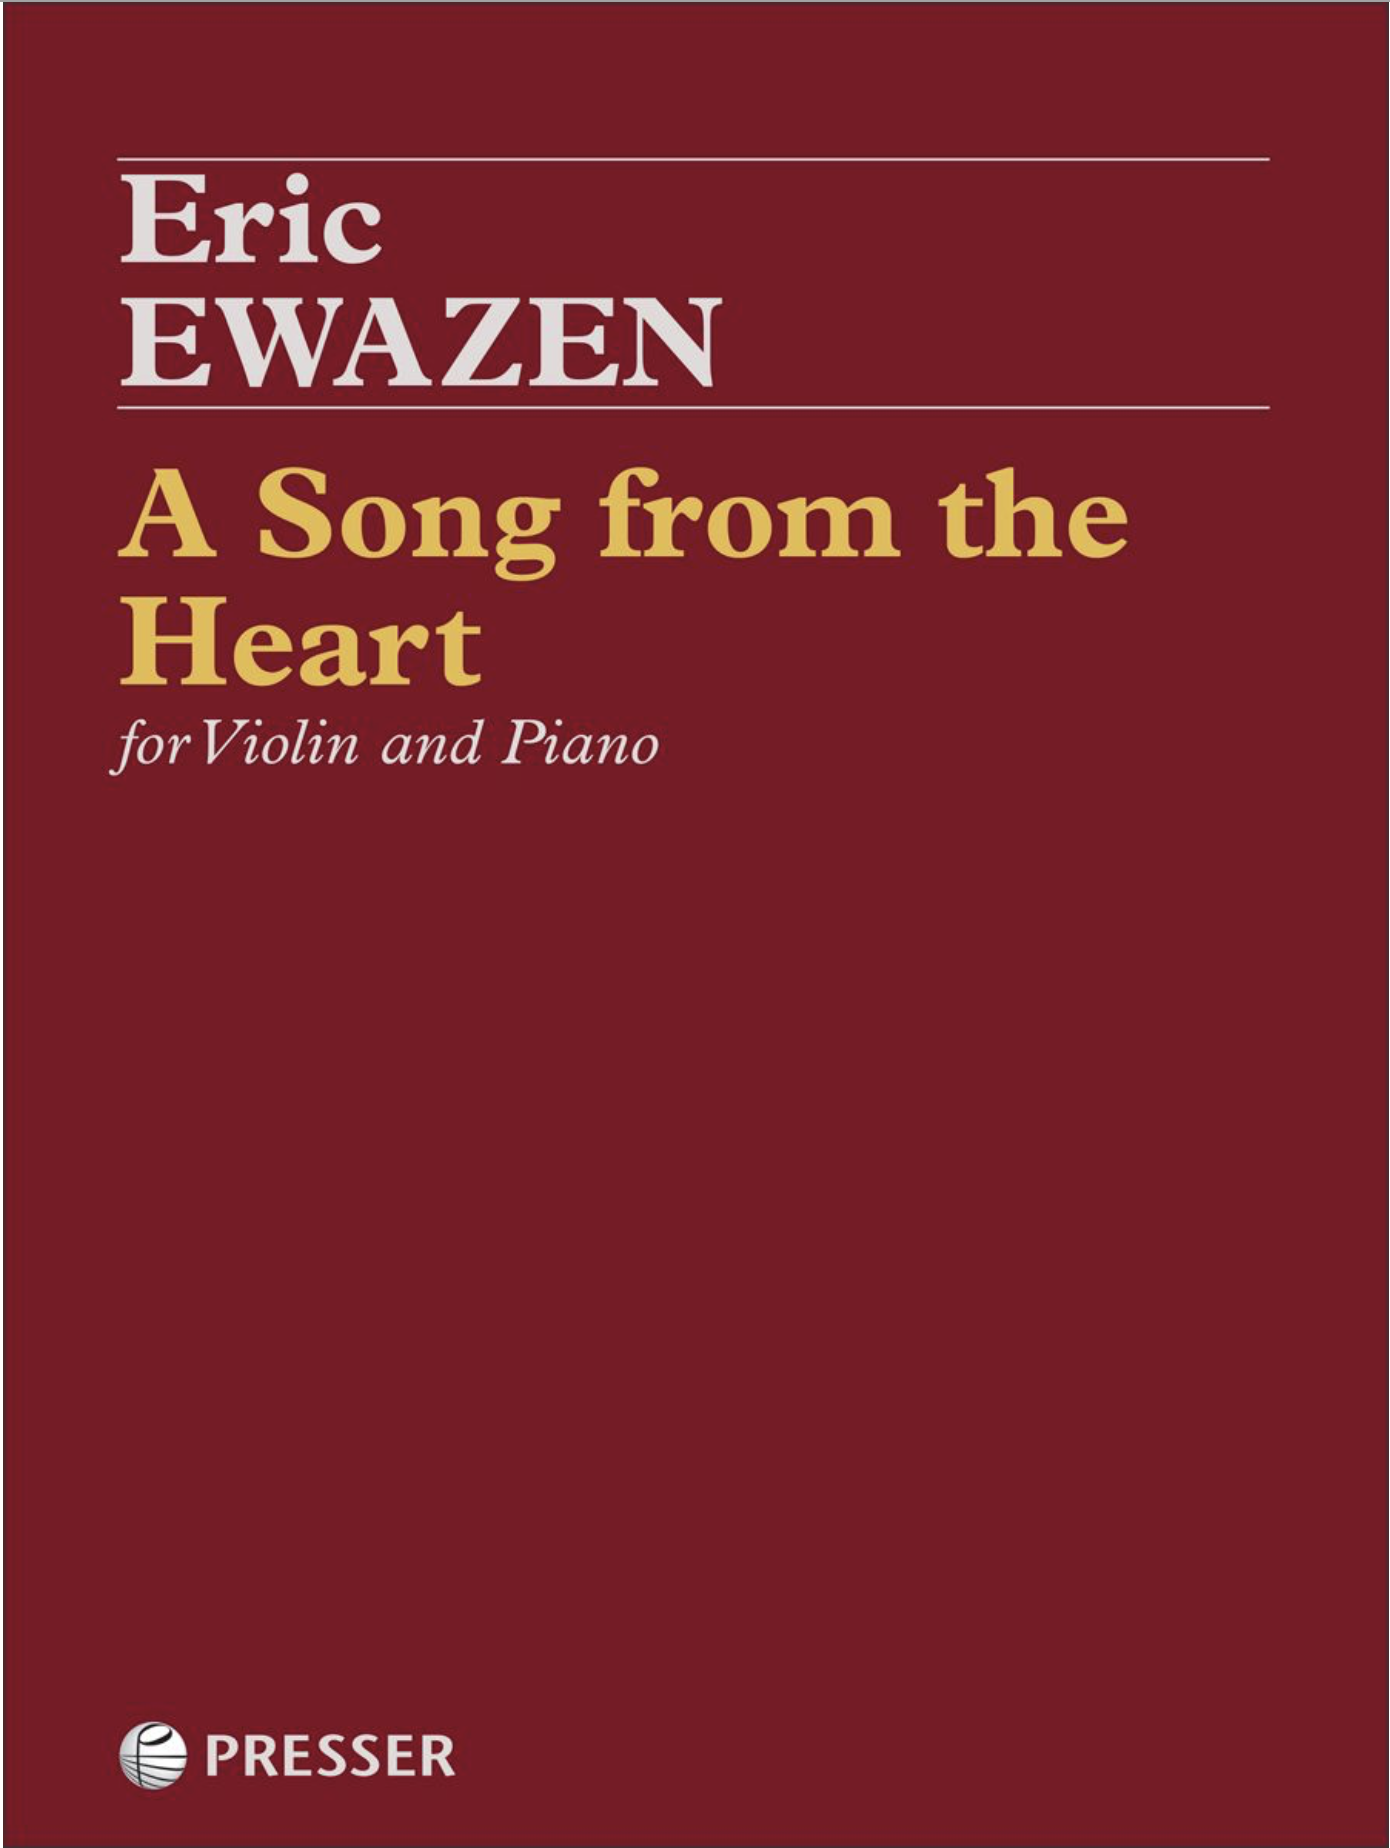 FISCHER Ewazen: A Song from the Heart (violin and piano)